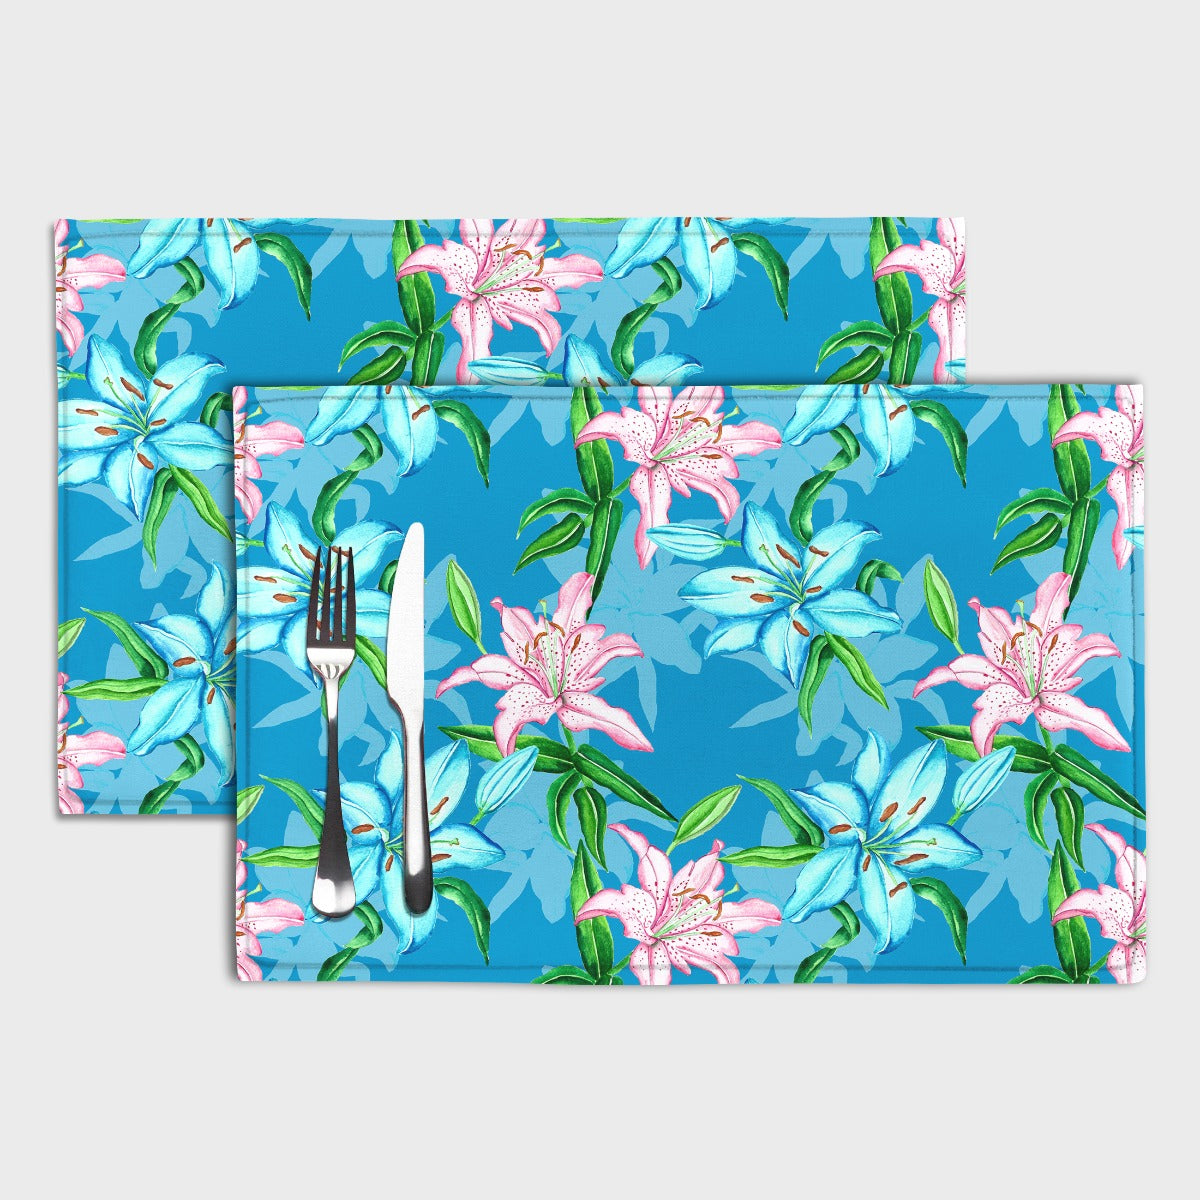 Lily floral design Table Mats